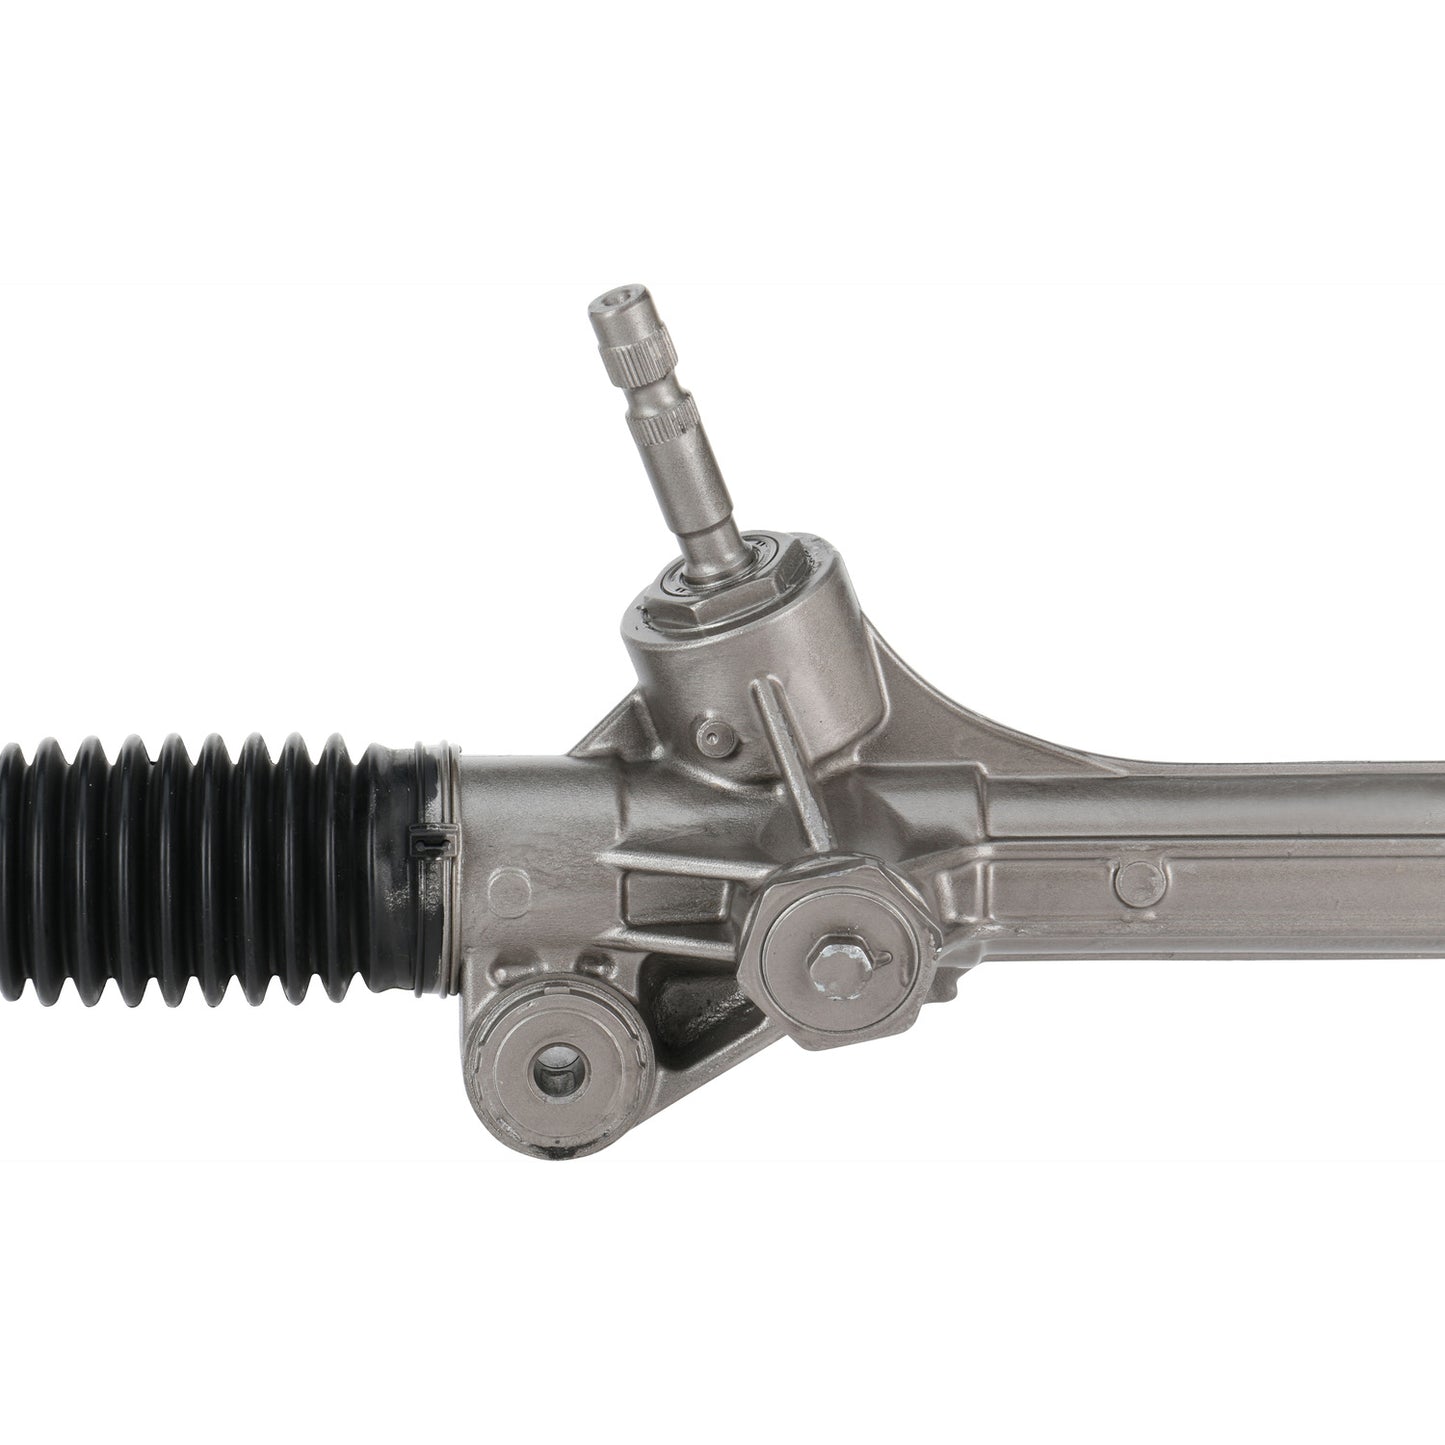 Rack and Pinion Assembly - MAVAL - Manual - Remanufactured - 94333M